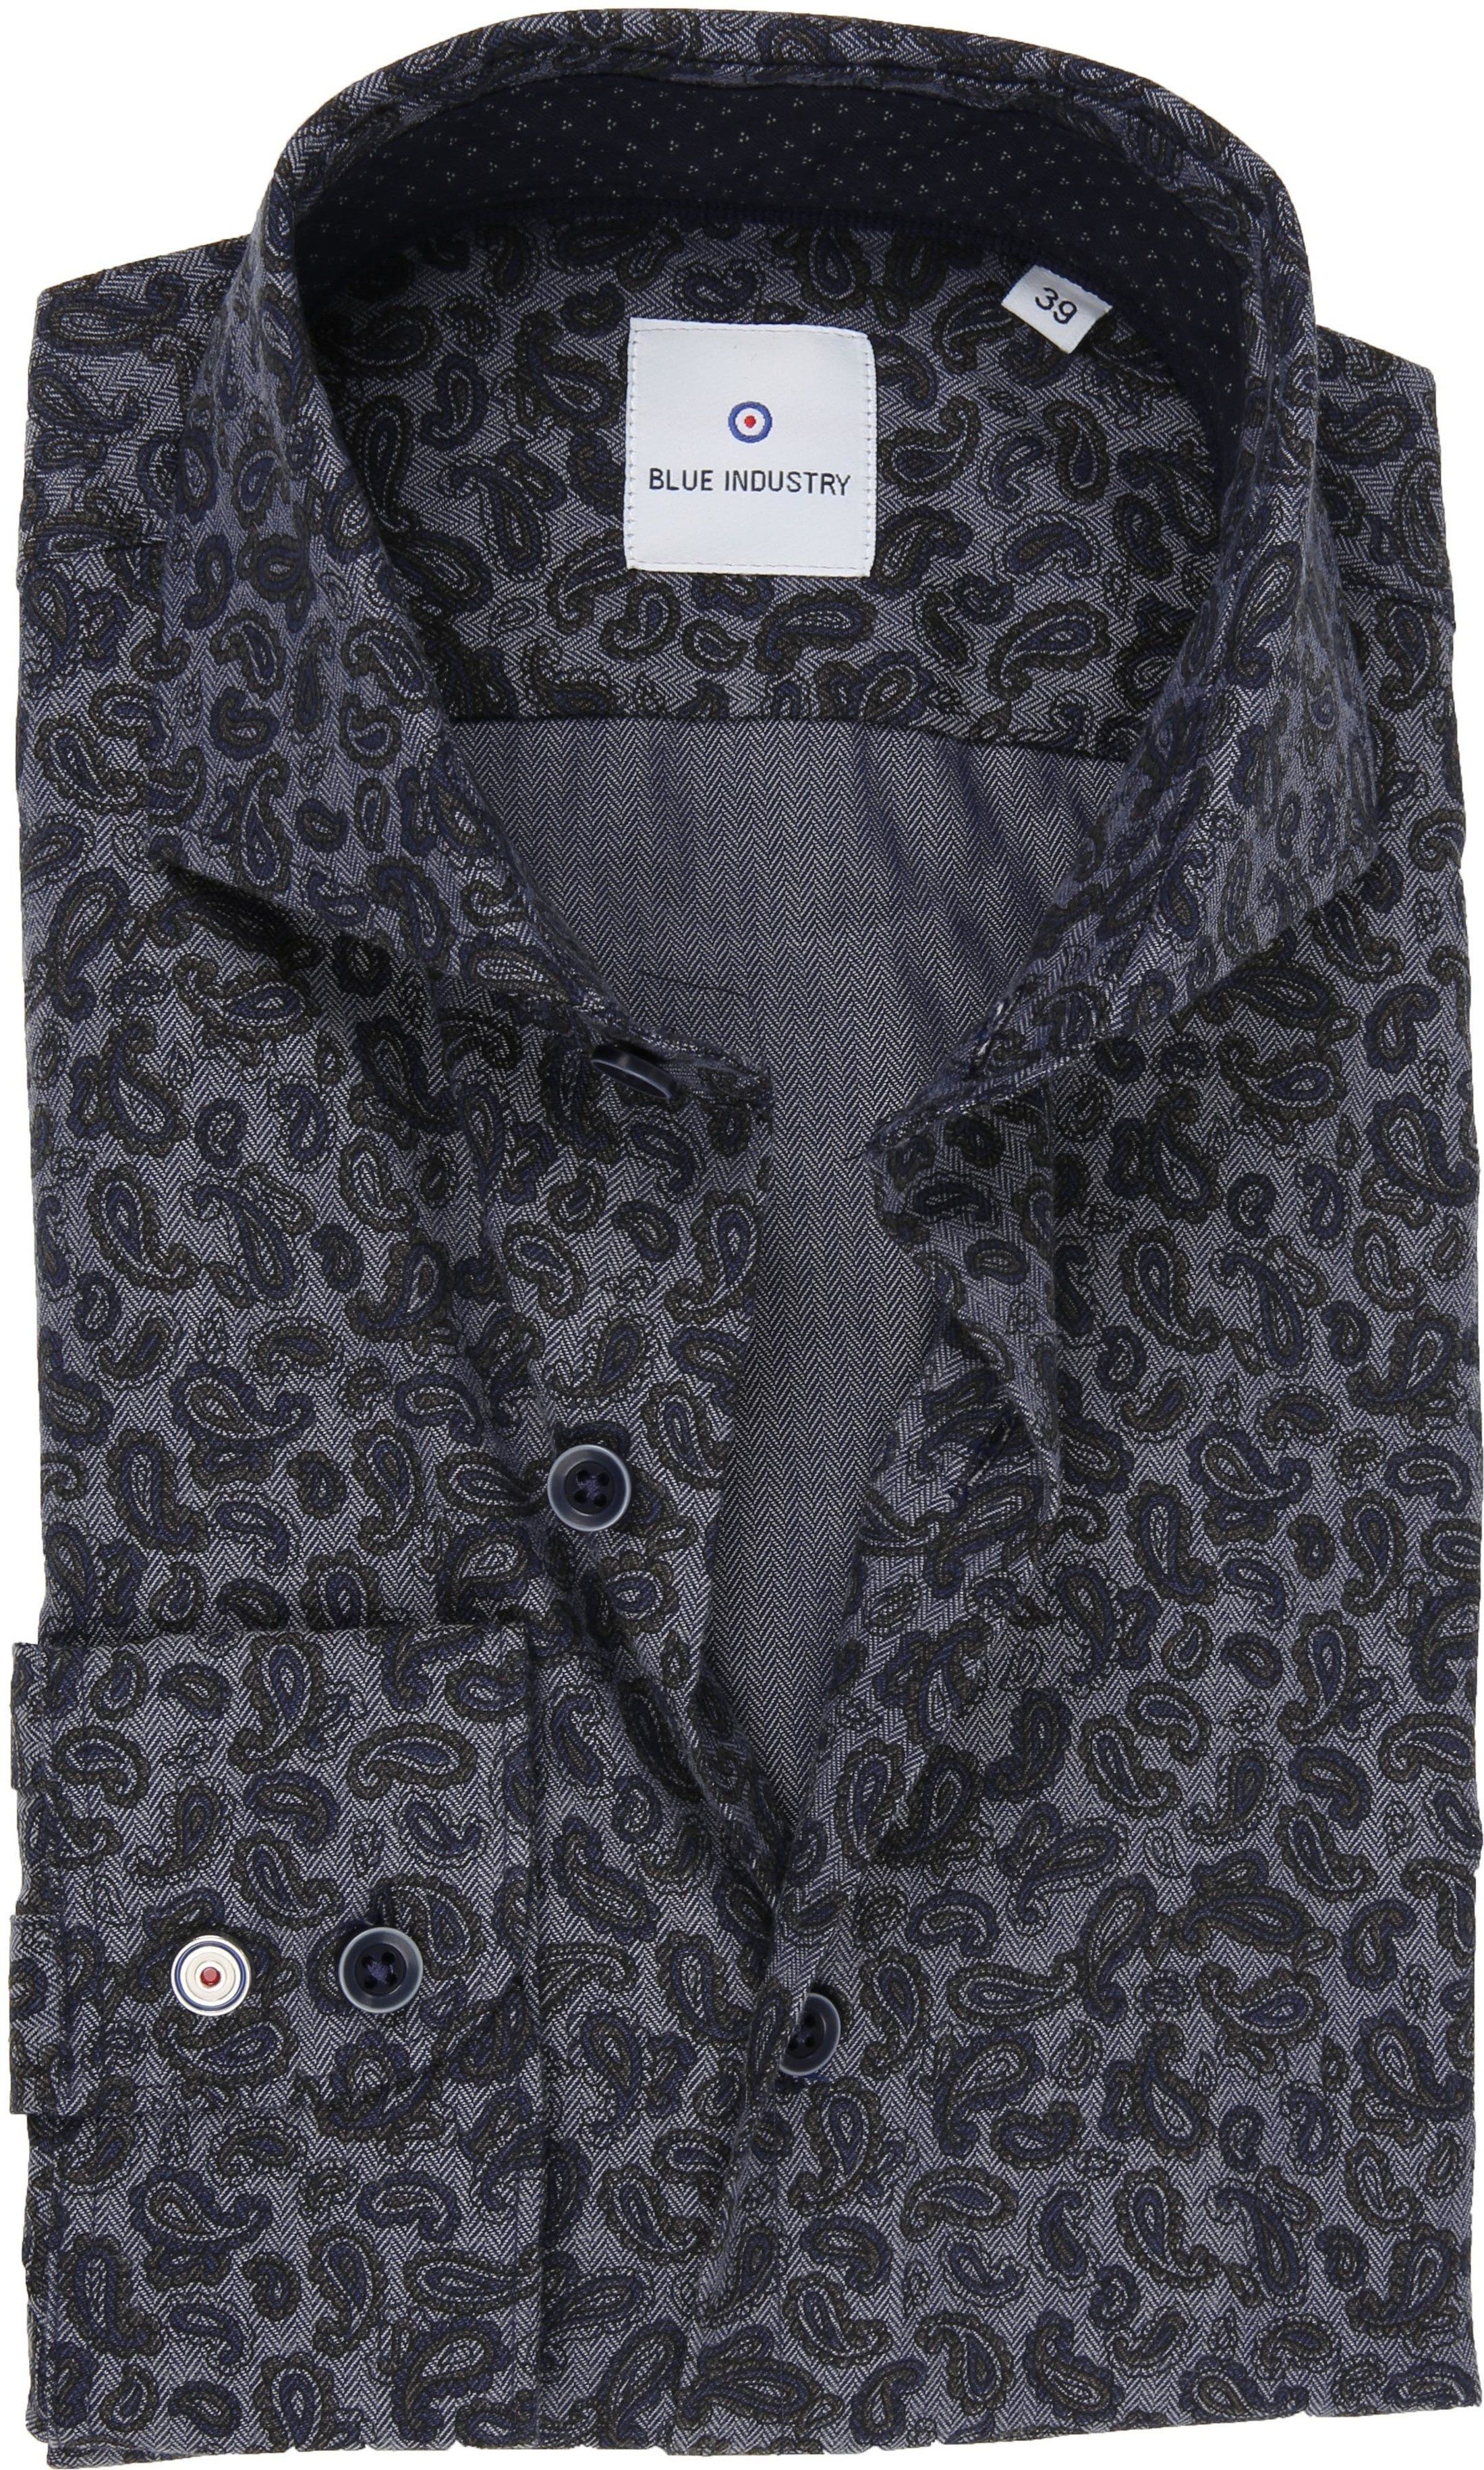 Blue Industry Shirt Paisley Navy Multicolour size 15 1/2